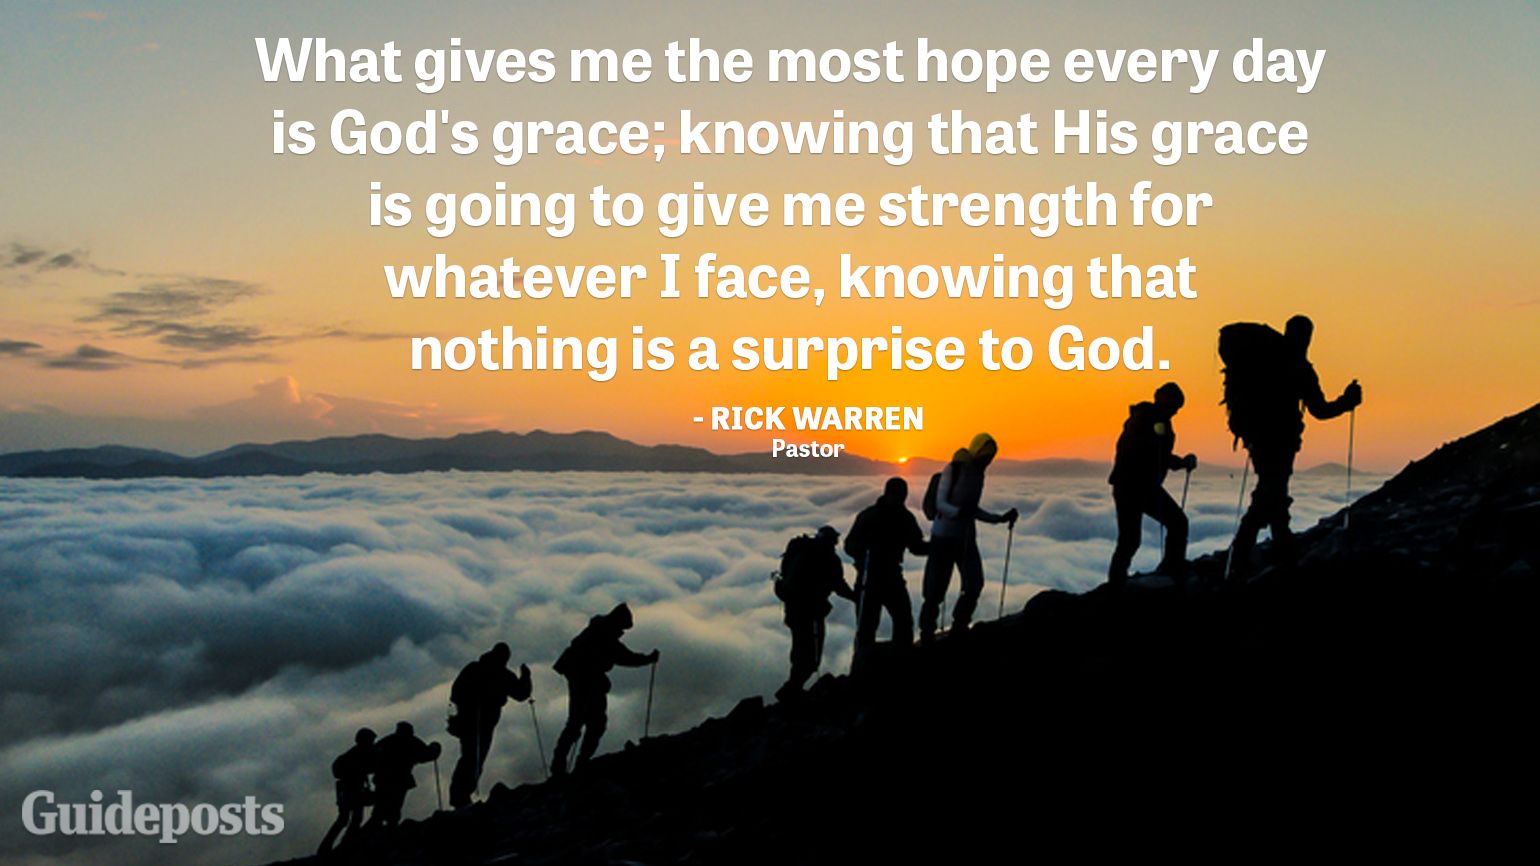 "What gives me the most hope every day is God's grace; knowing that His grace is going to give me strength for whatever I face, knowing that nothing is a surprise to God." —Rick Warren, Pastor